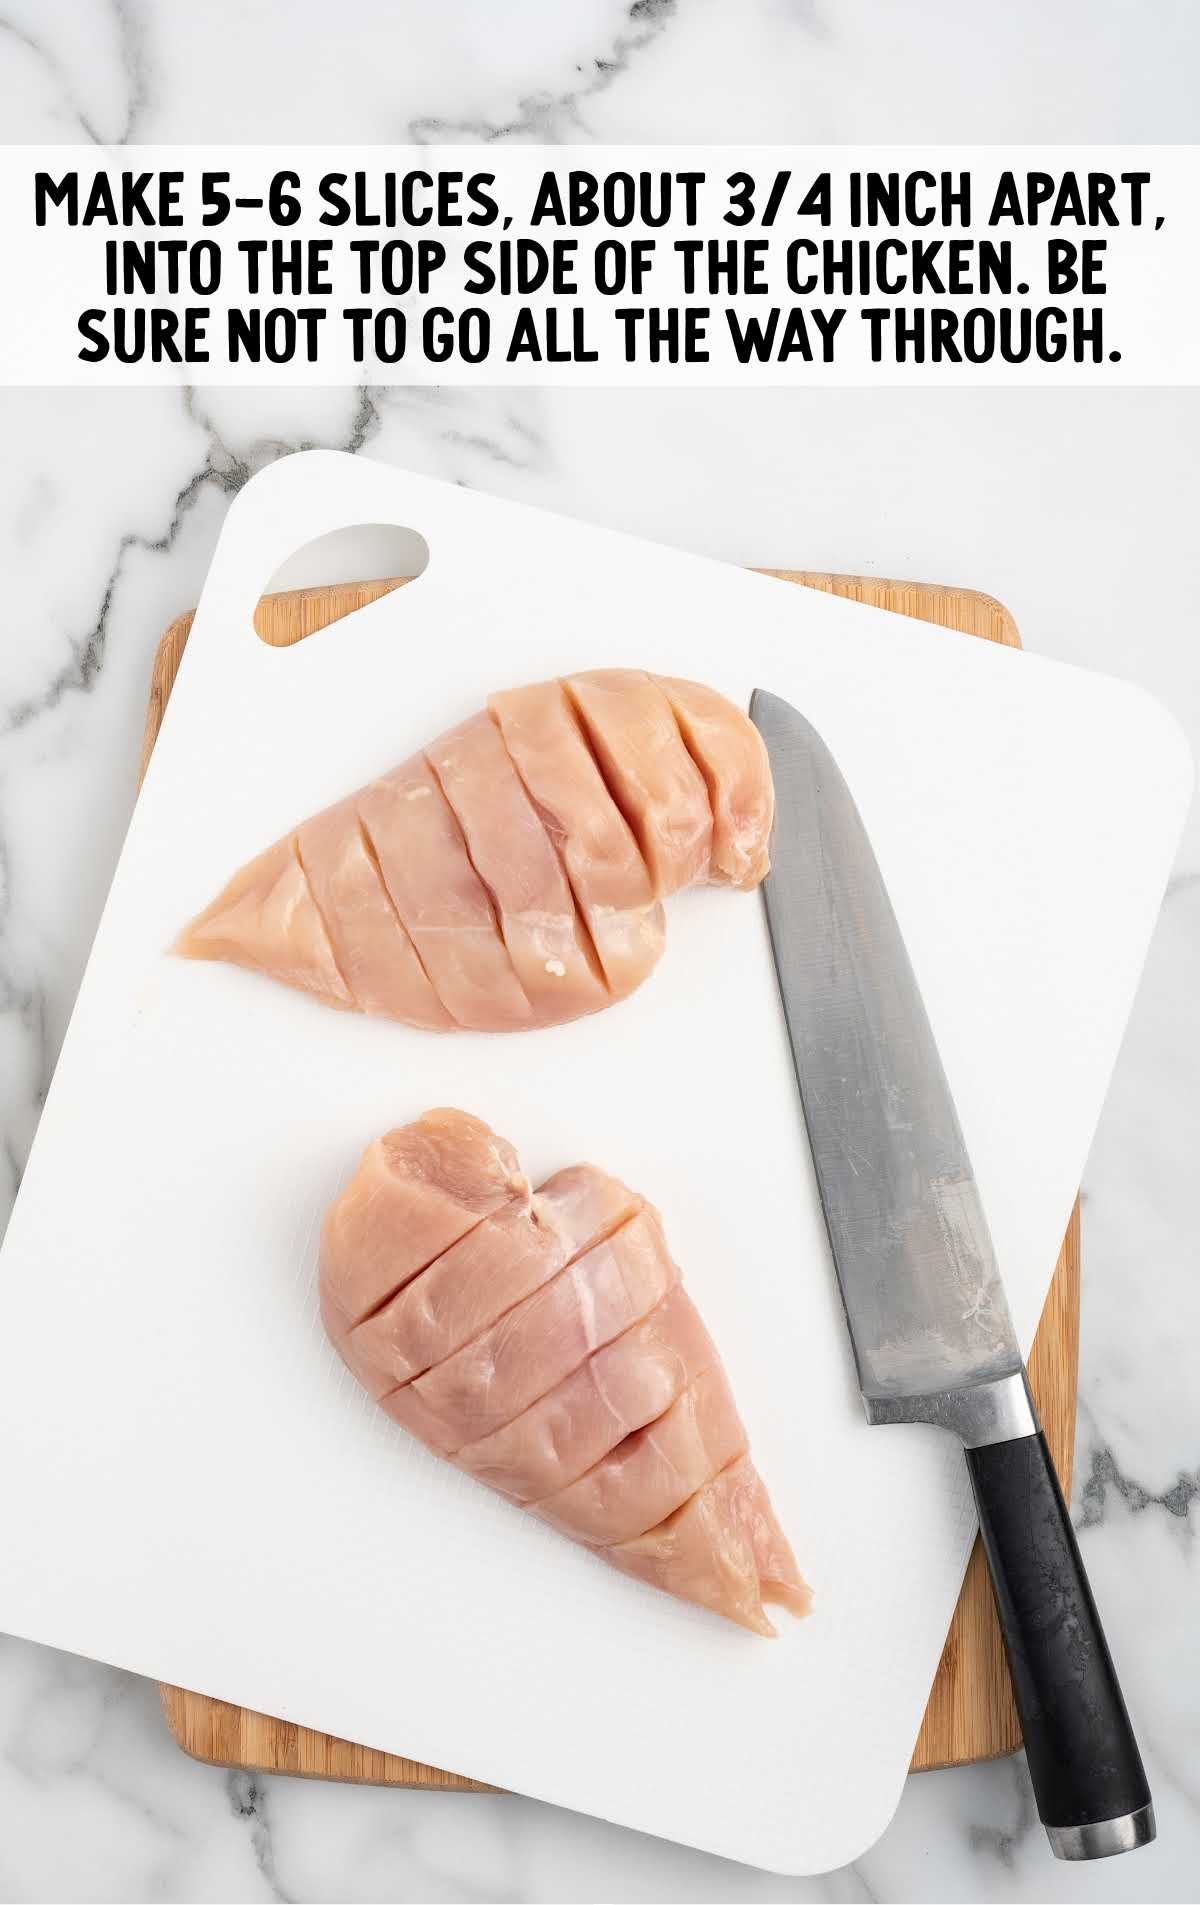 slices cut into the chicken breast on a wooden cutting board